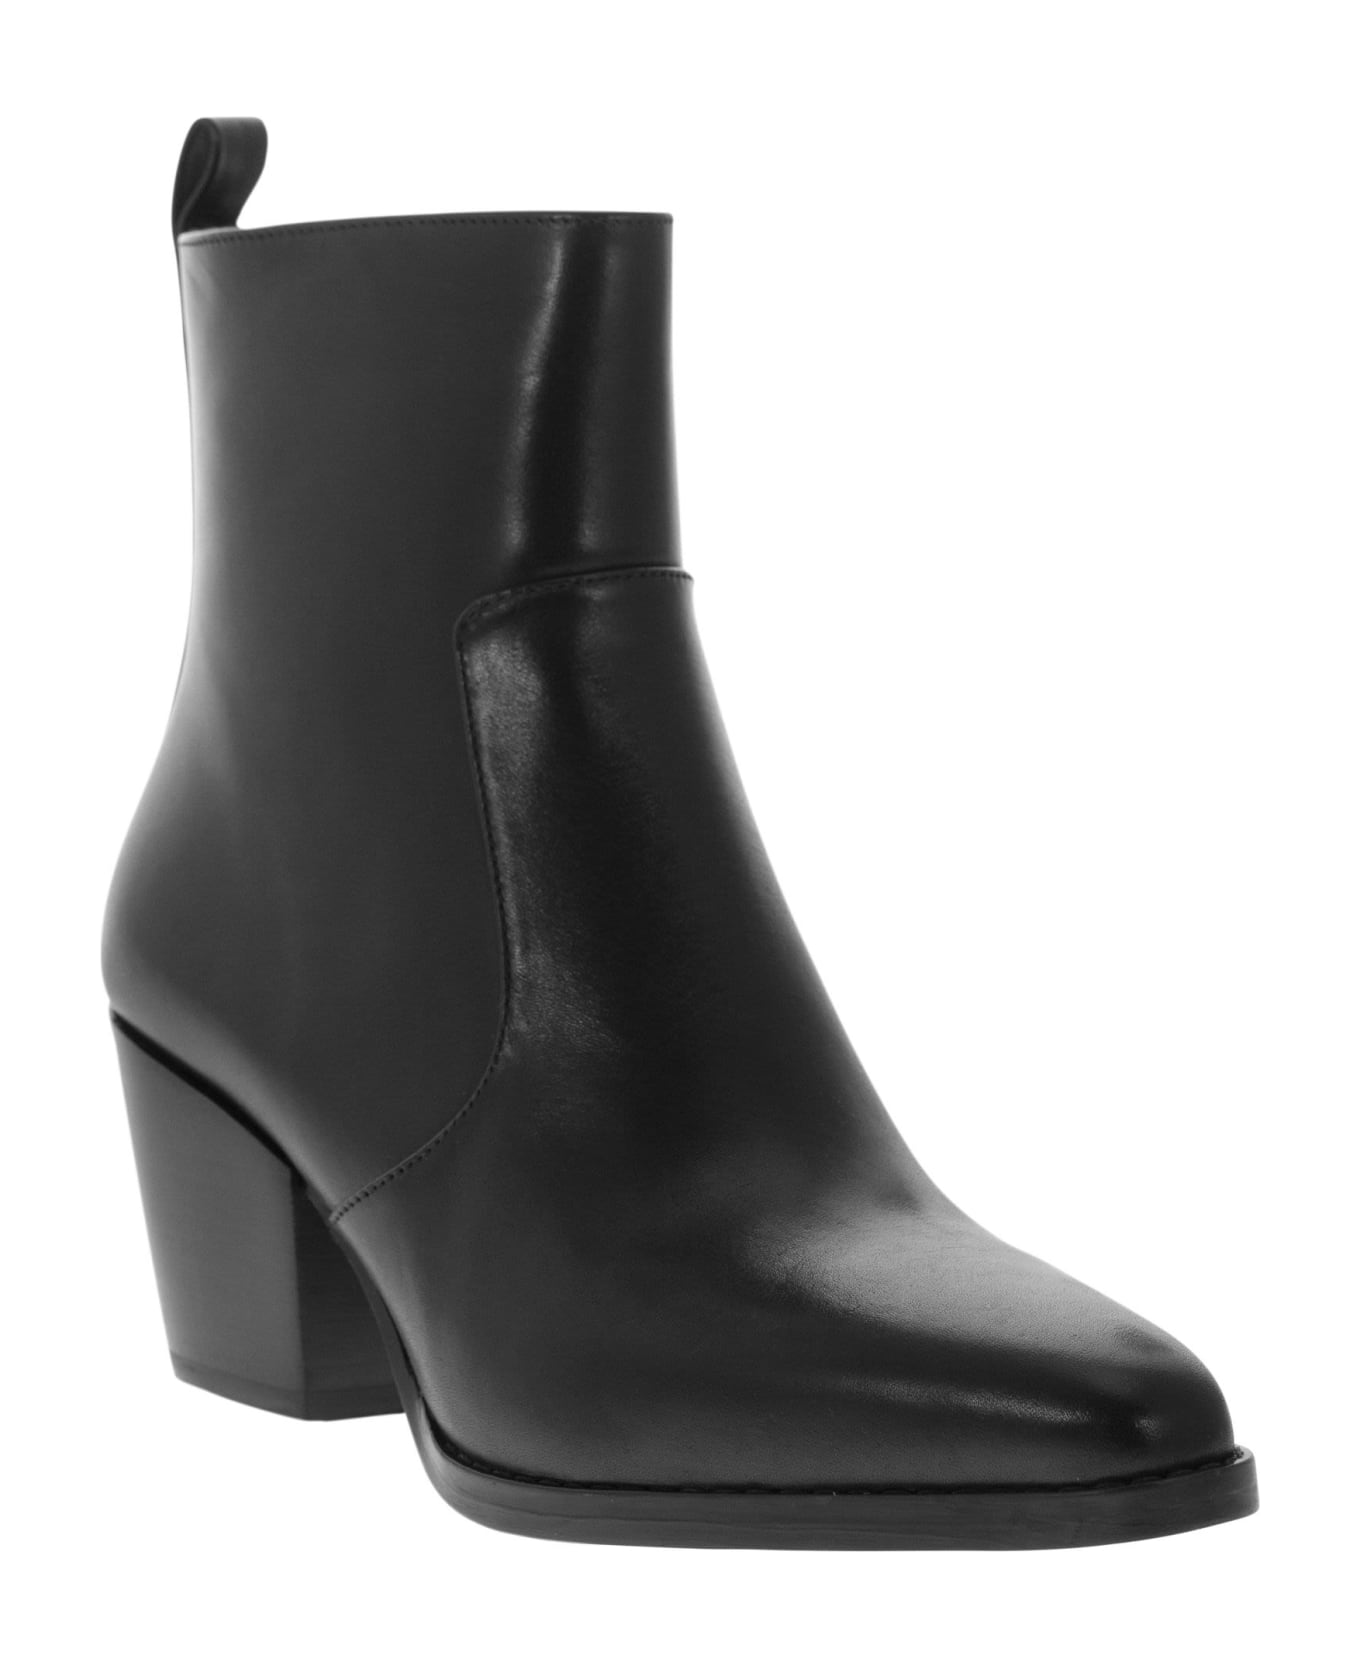 Michael Kors Harlow - Leather Ankle Boot - Black ブーツ